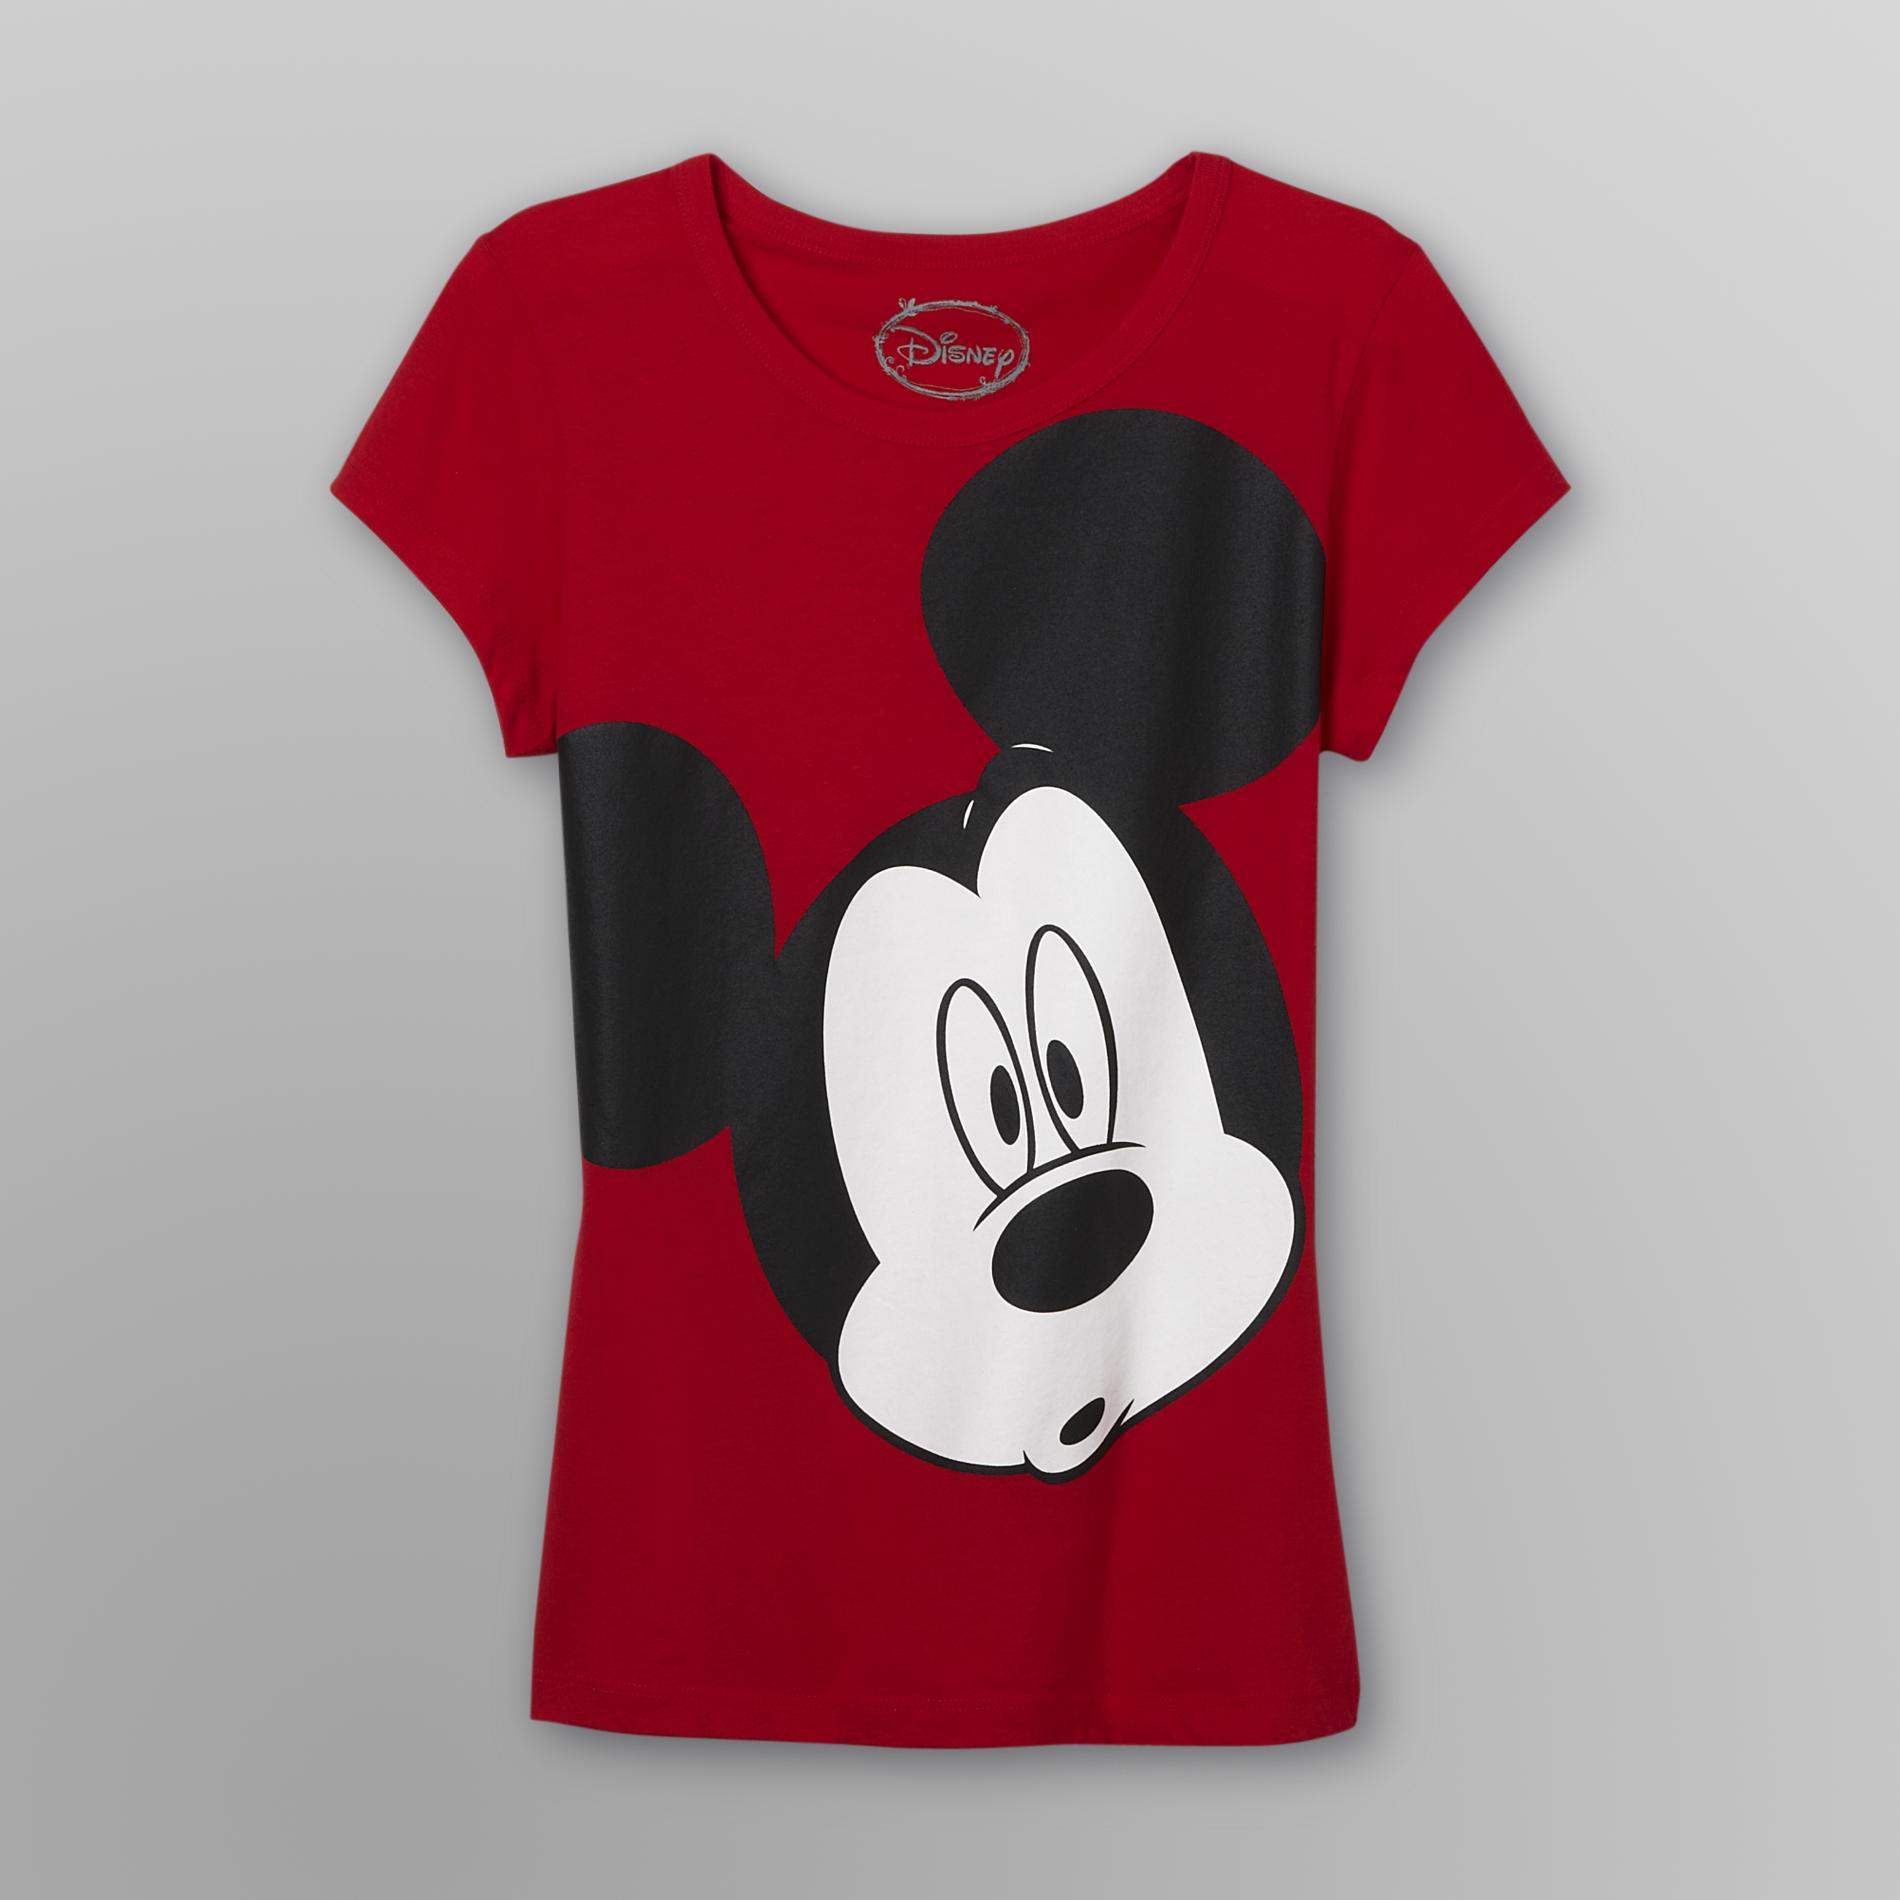 Disney Mickey Mouse Junior's Graphic T-Shirt